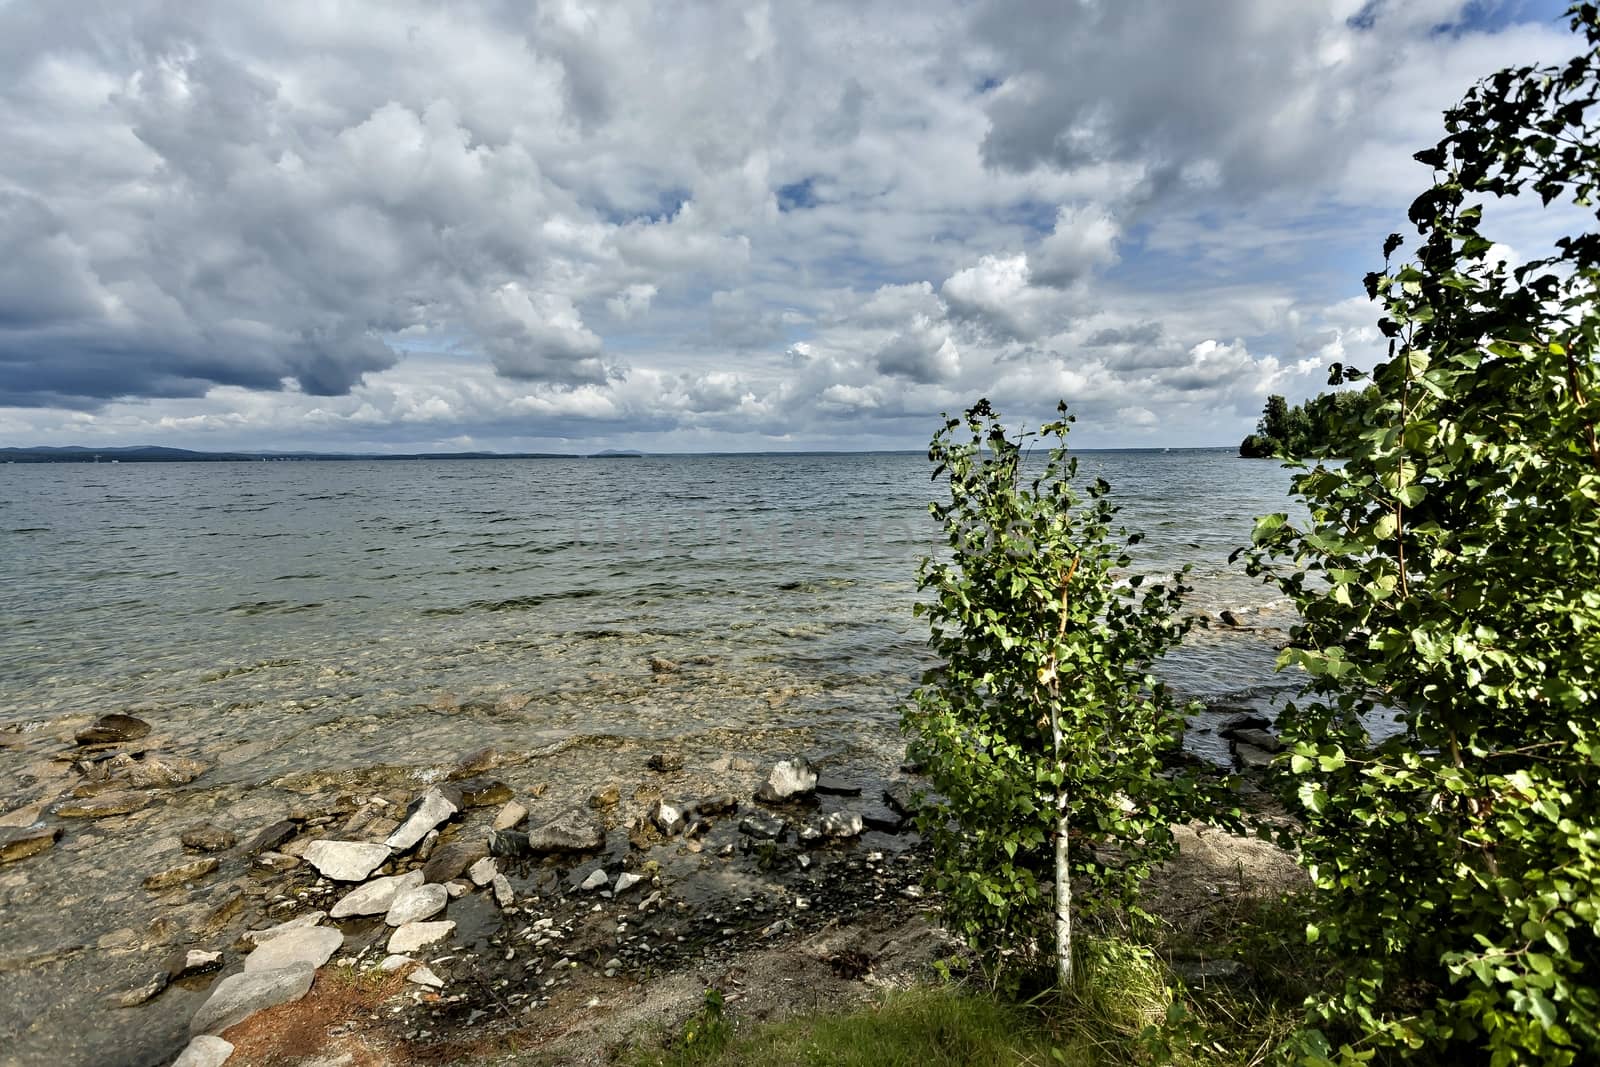 wooded shore against the lake and cloudy sky on a Sunny summer day